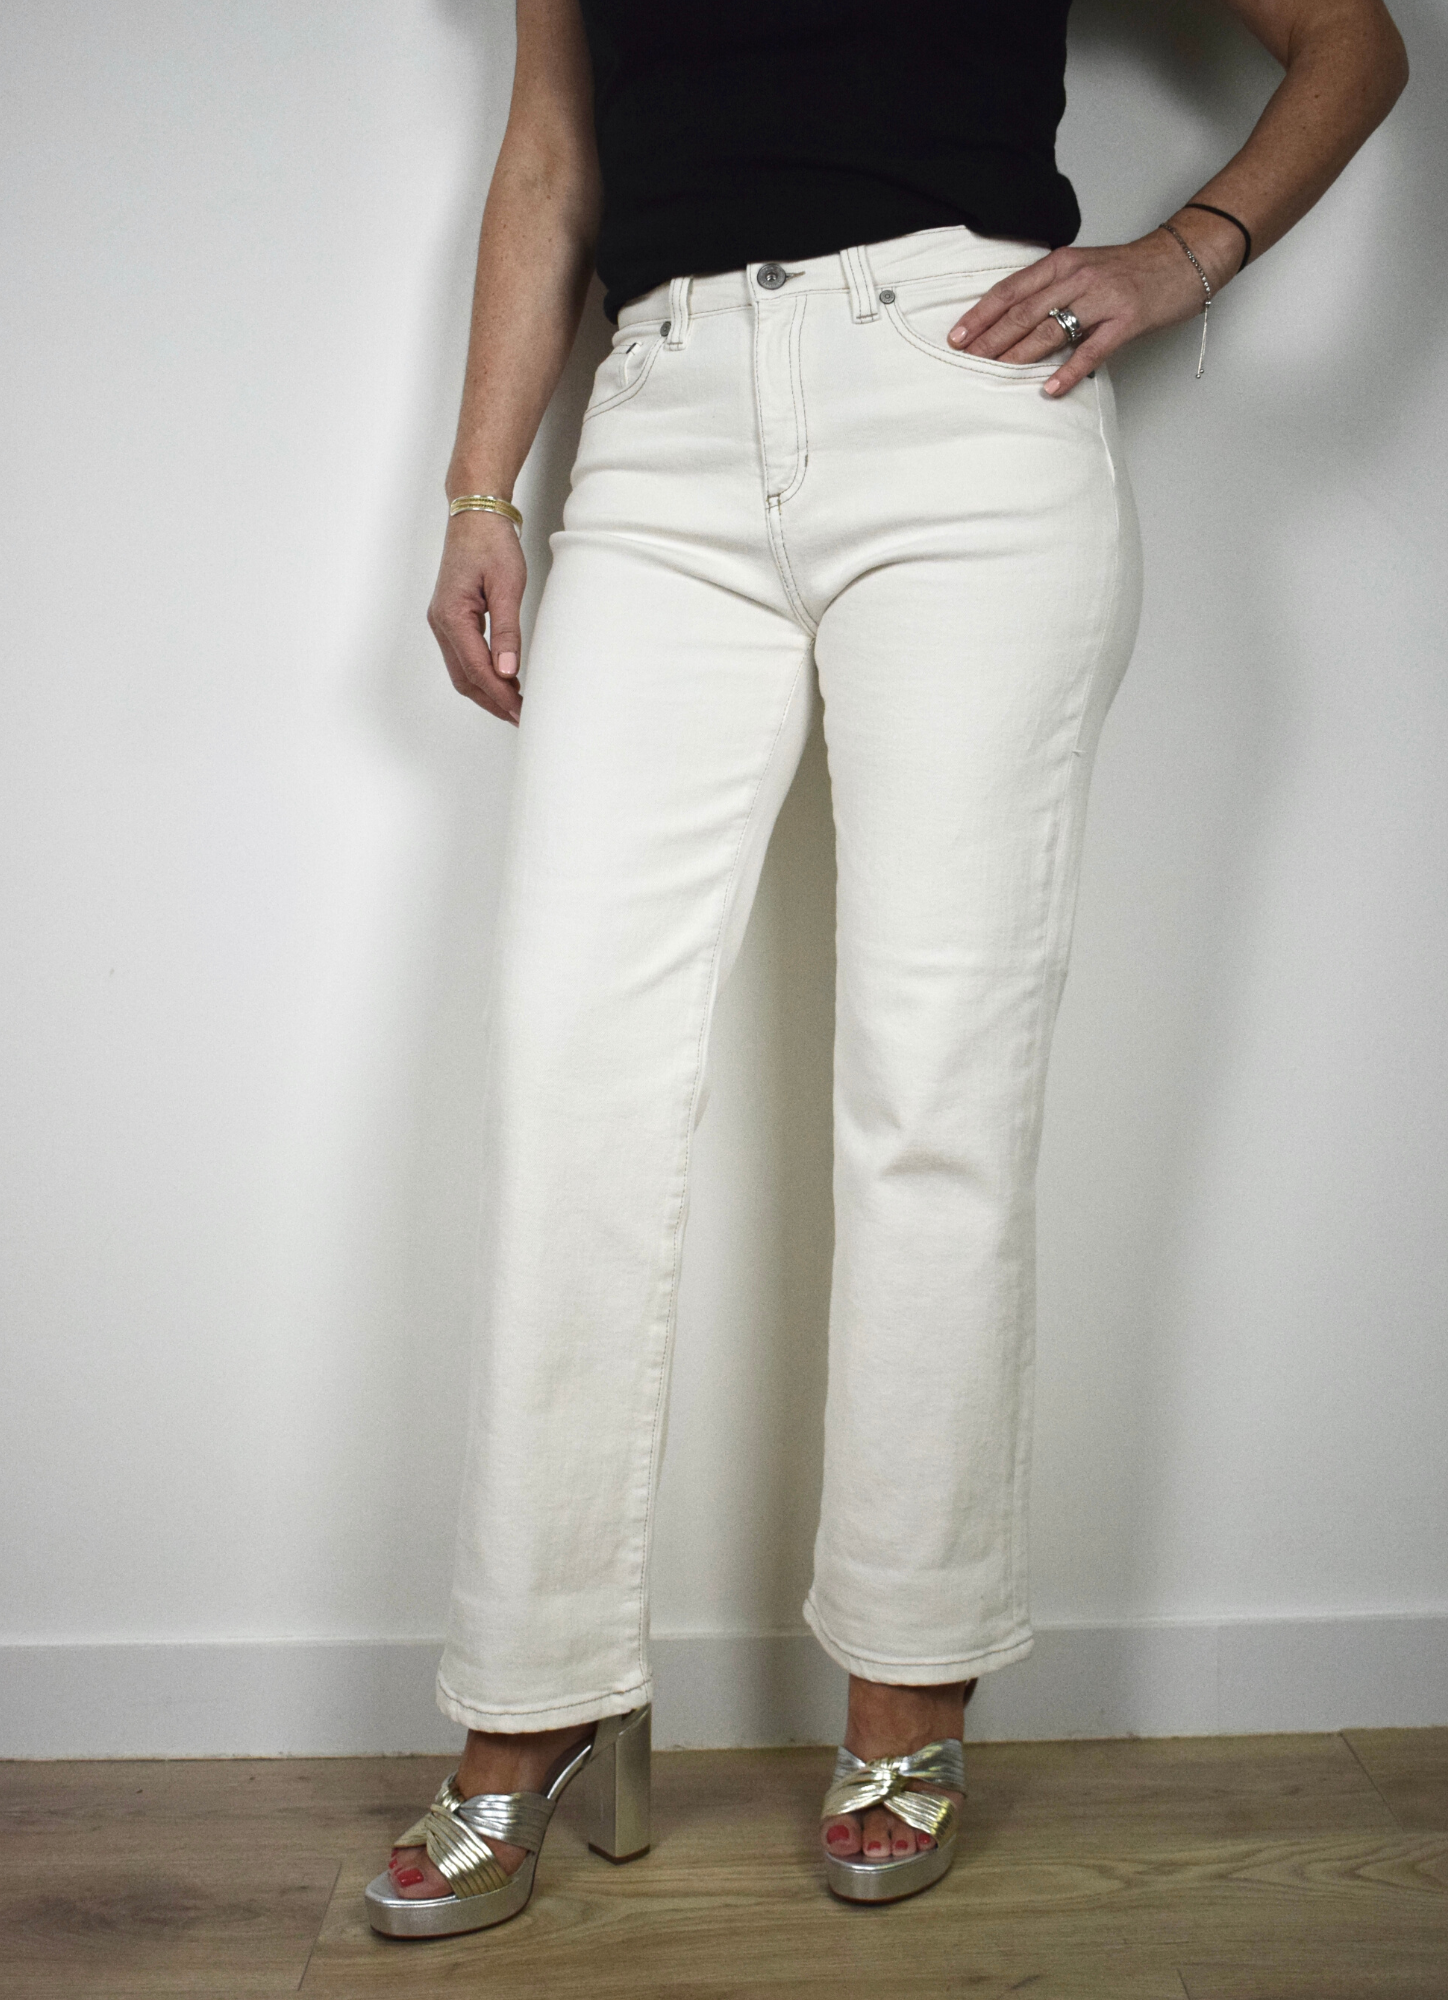 Straight leg high rise jeans in white a neat hem 